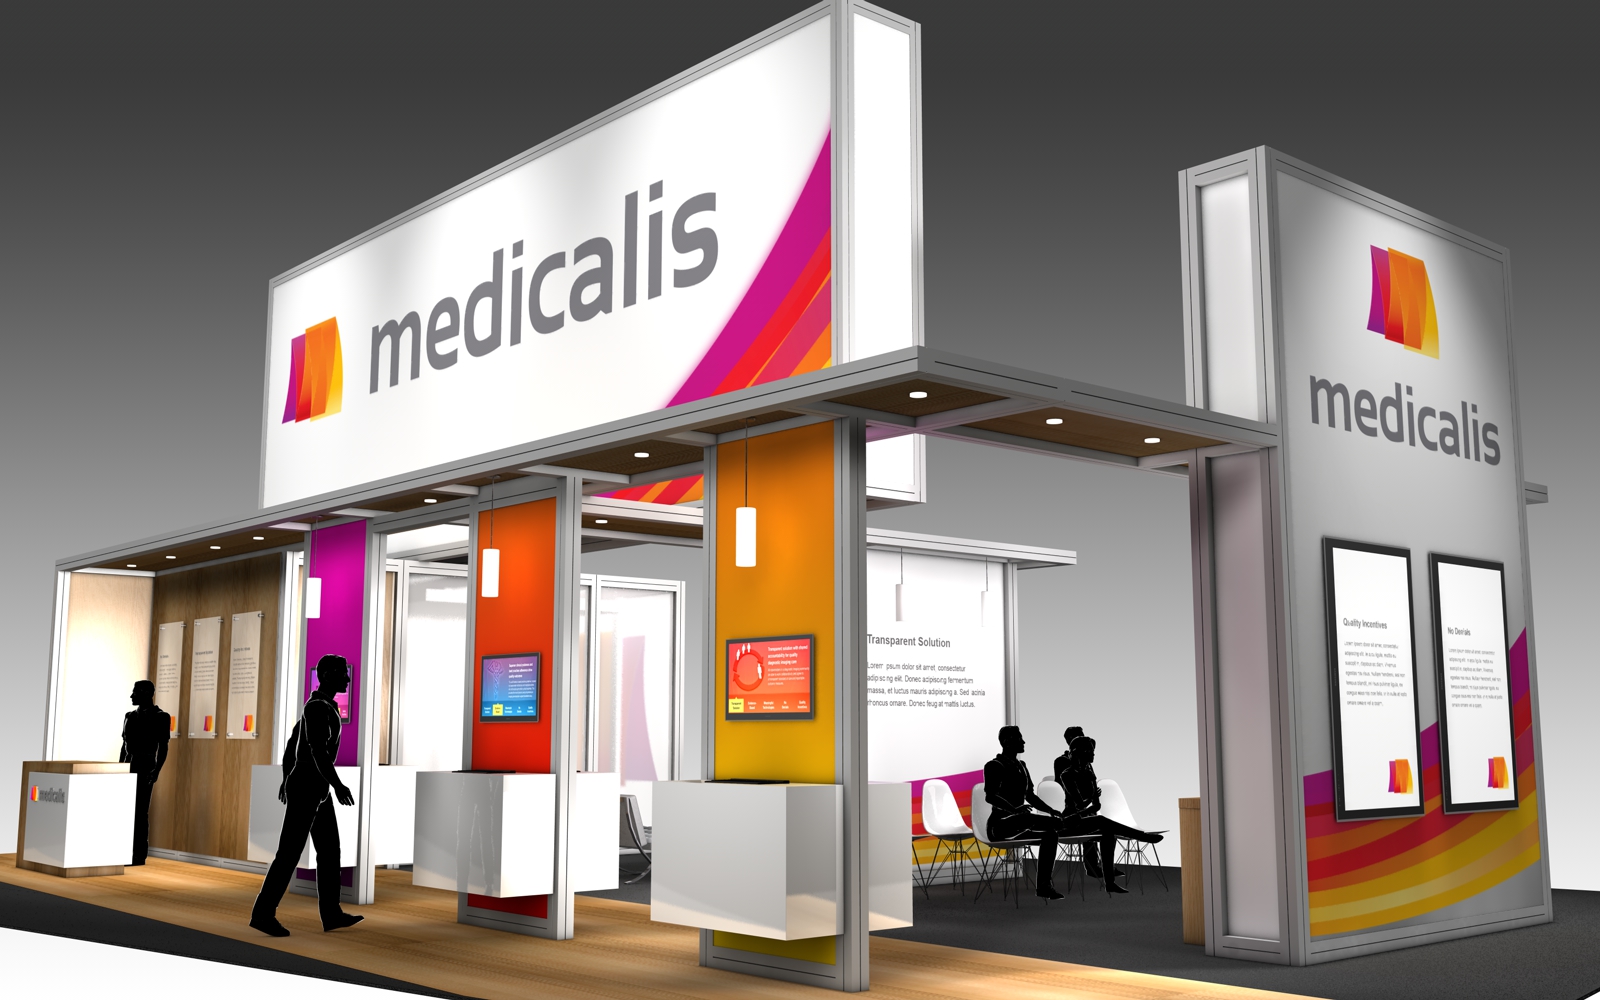 30' x 50' rental exhibit with vibrant graphics and large corporate branding for a U.S. Radiology Trade Show